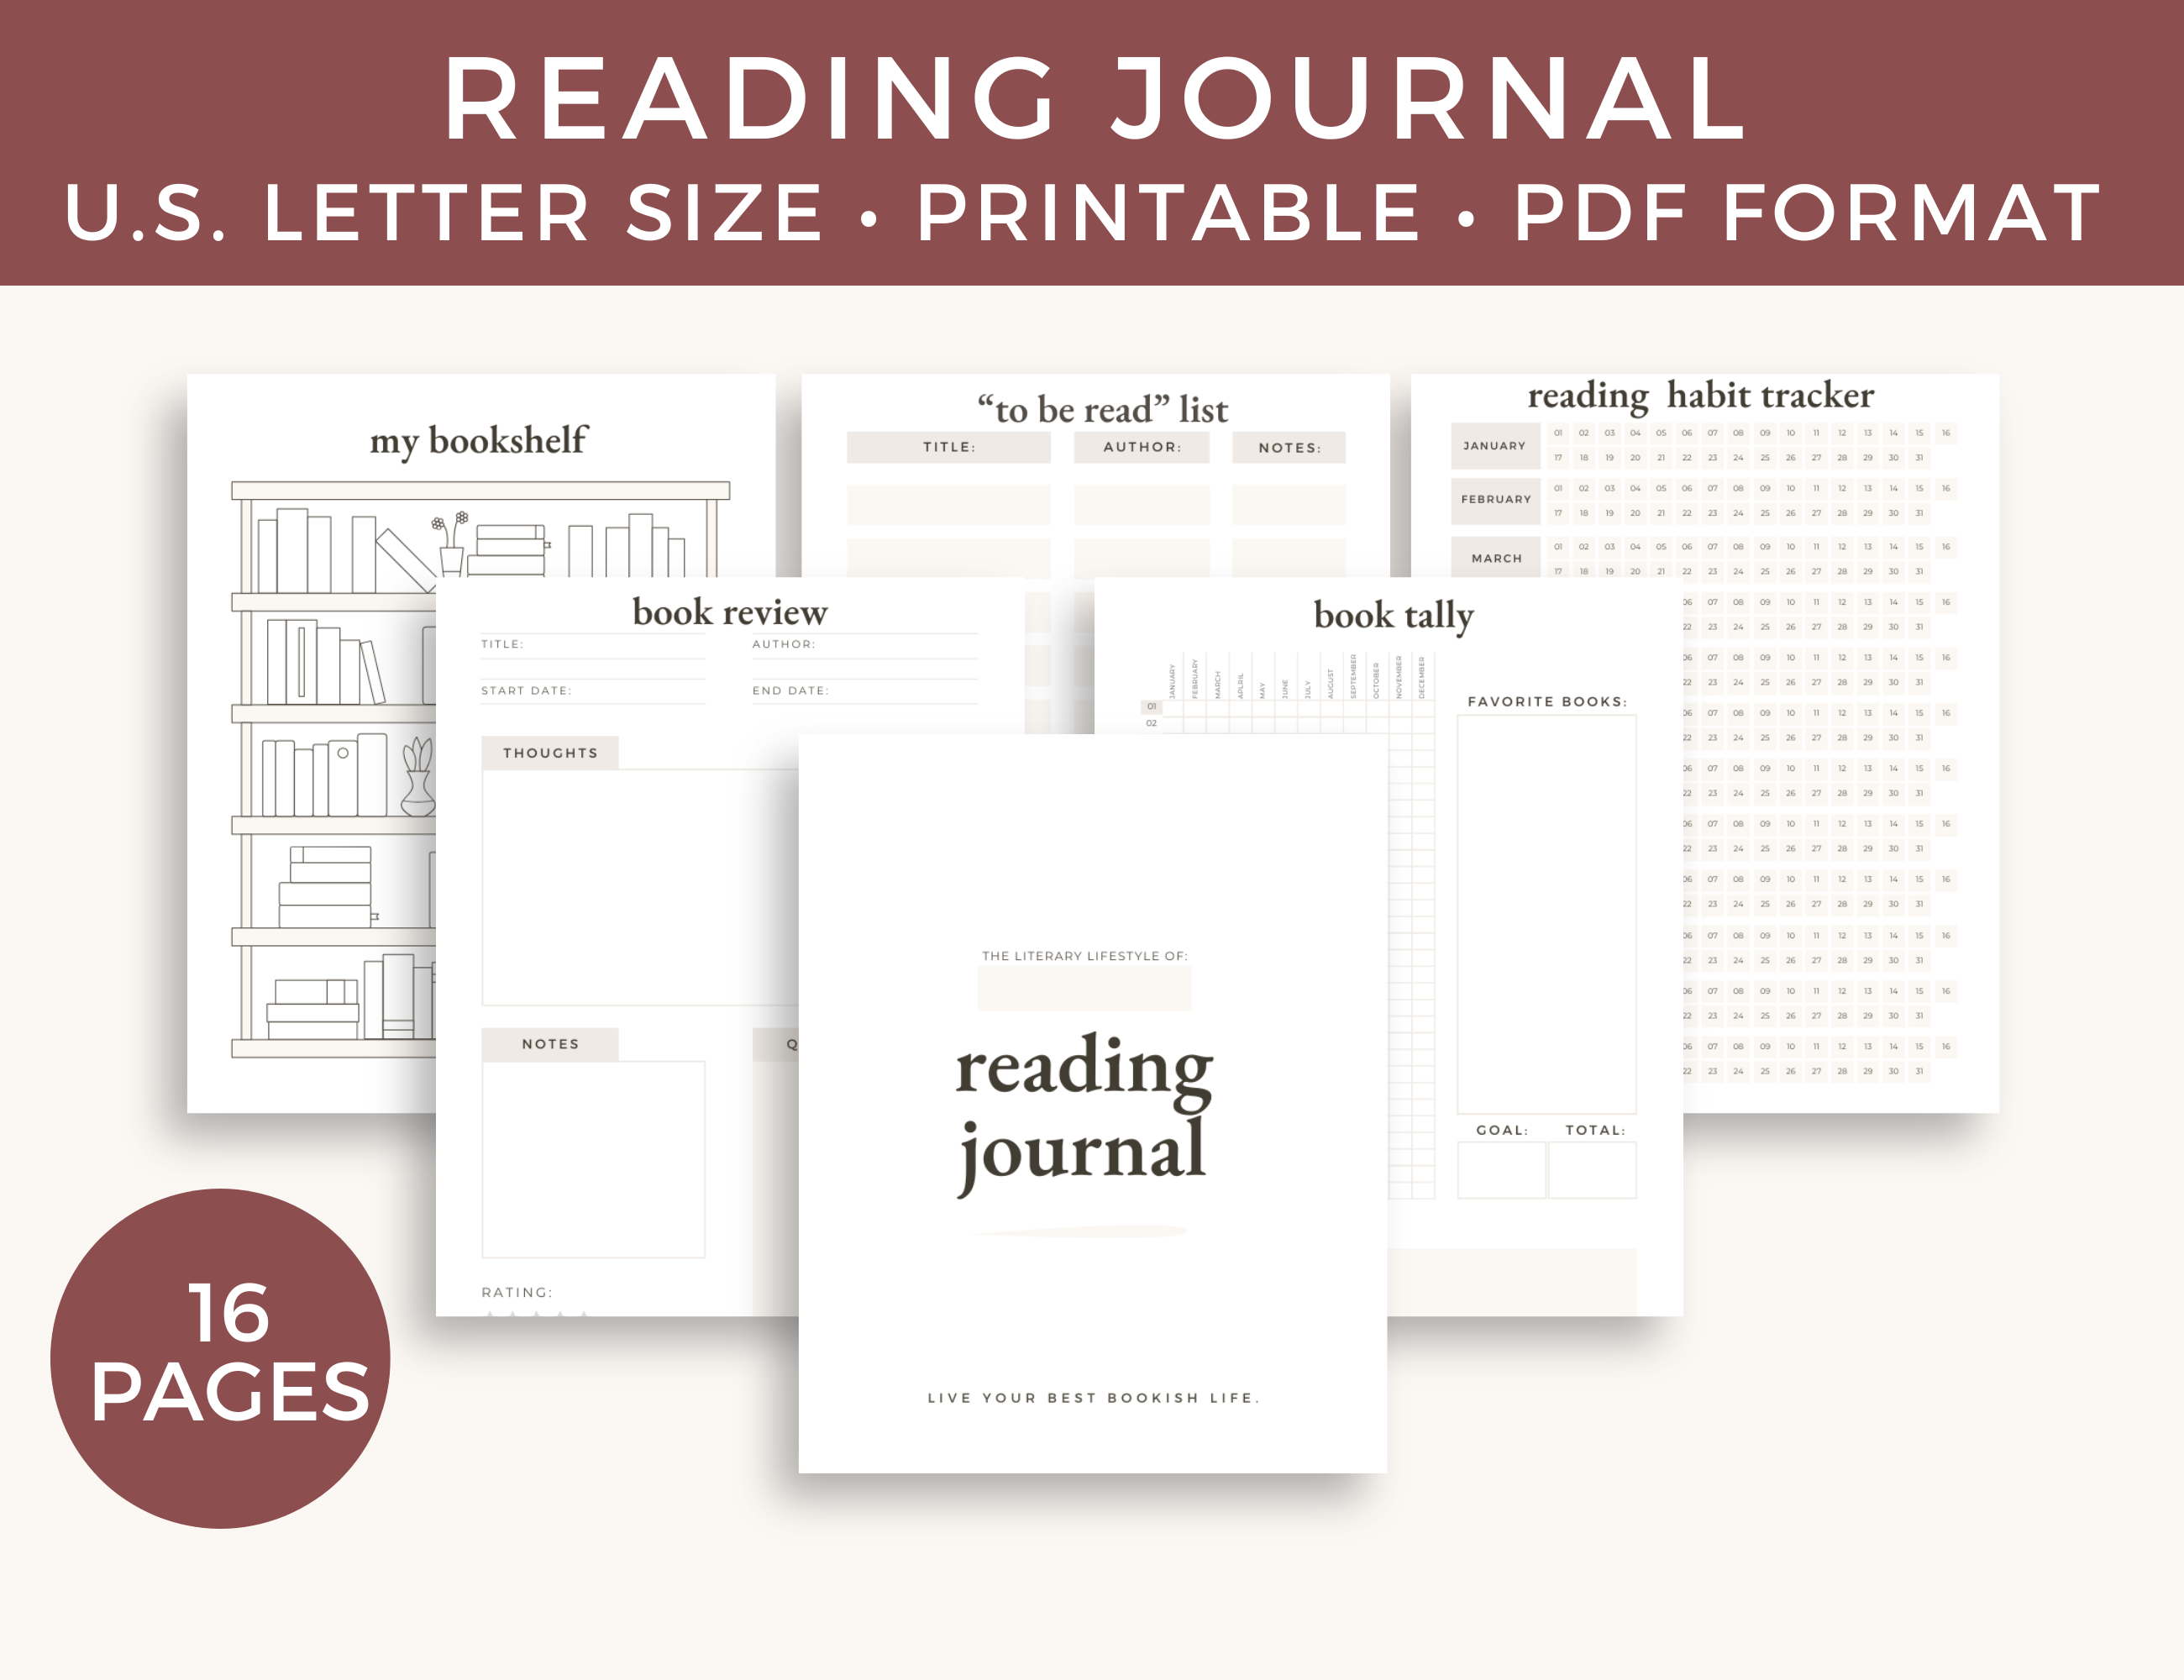 BiblioLifestyle - Reading Journals: Everything You Need To Know